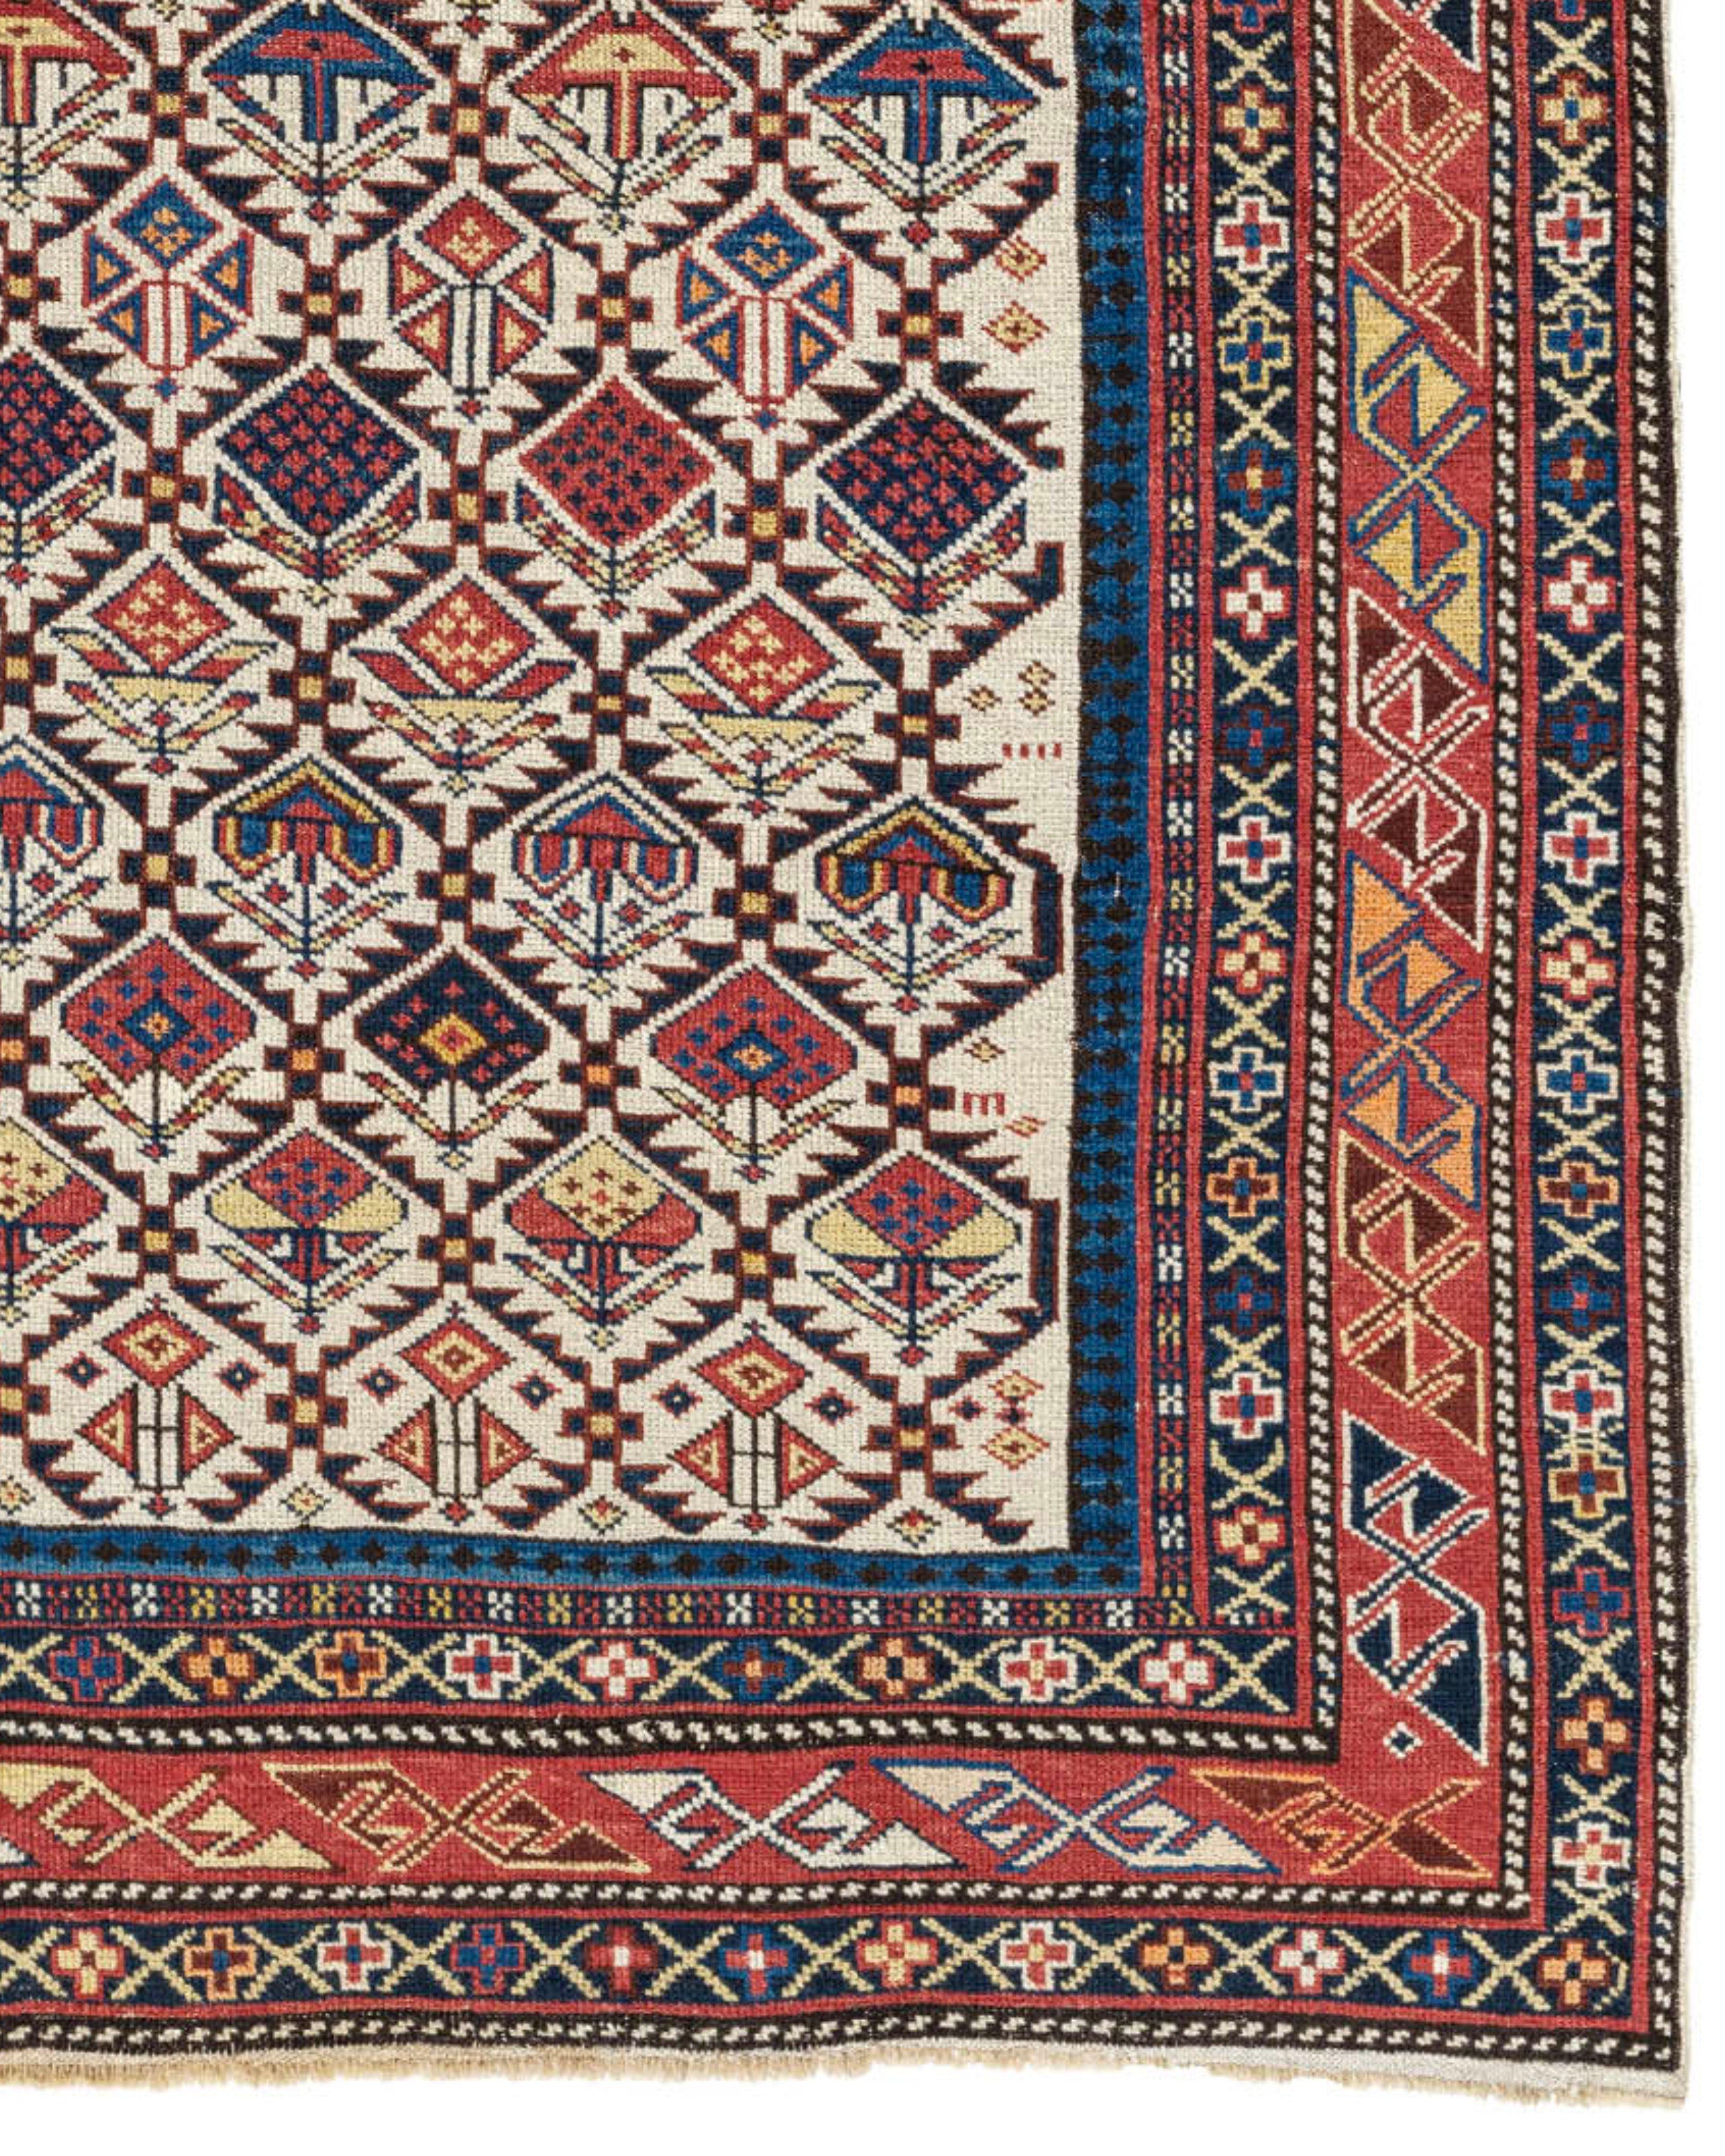 Shirvan Prayer Rug, Late 19th Century In Excellent Condition For Sale In San Francisco, CA